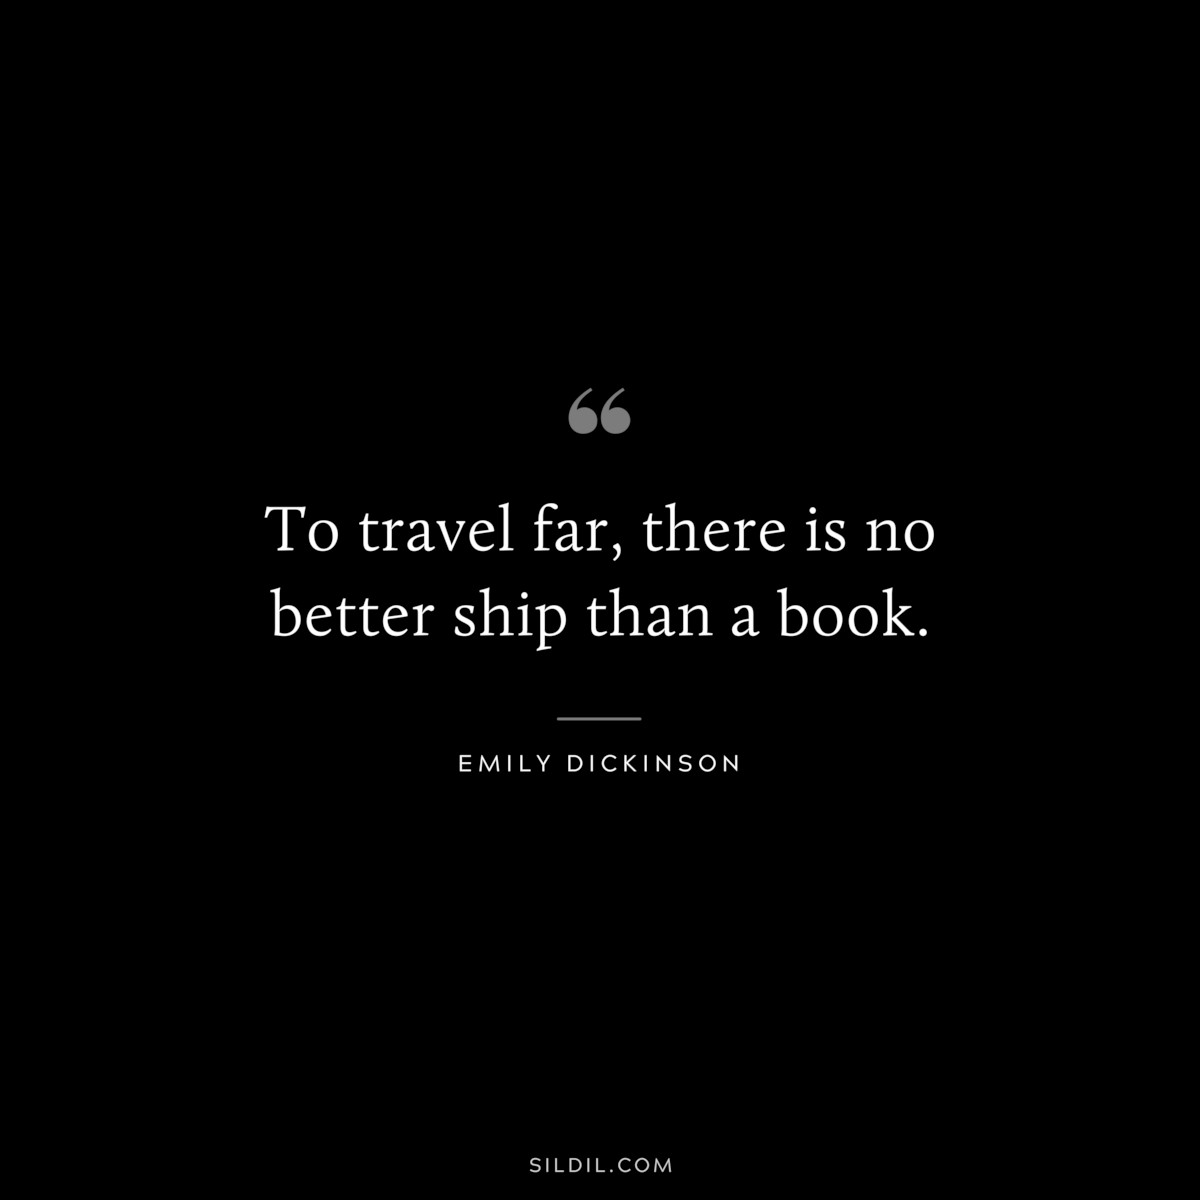 To travel far, there is no better ship than a book.